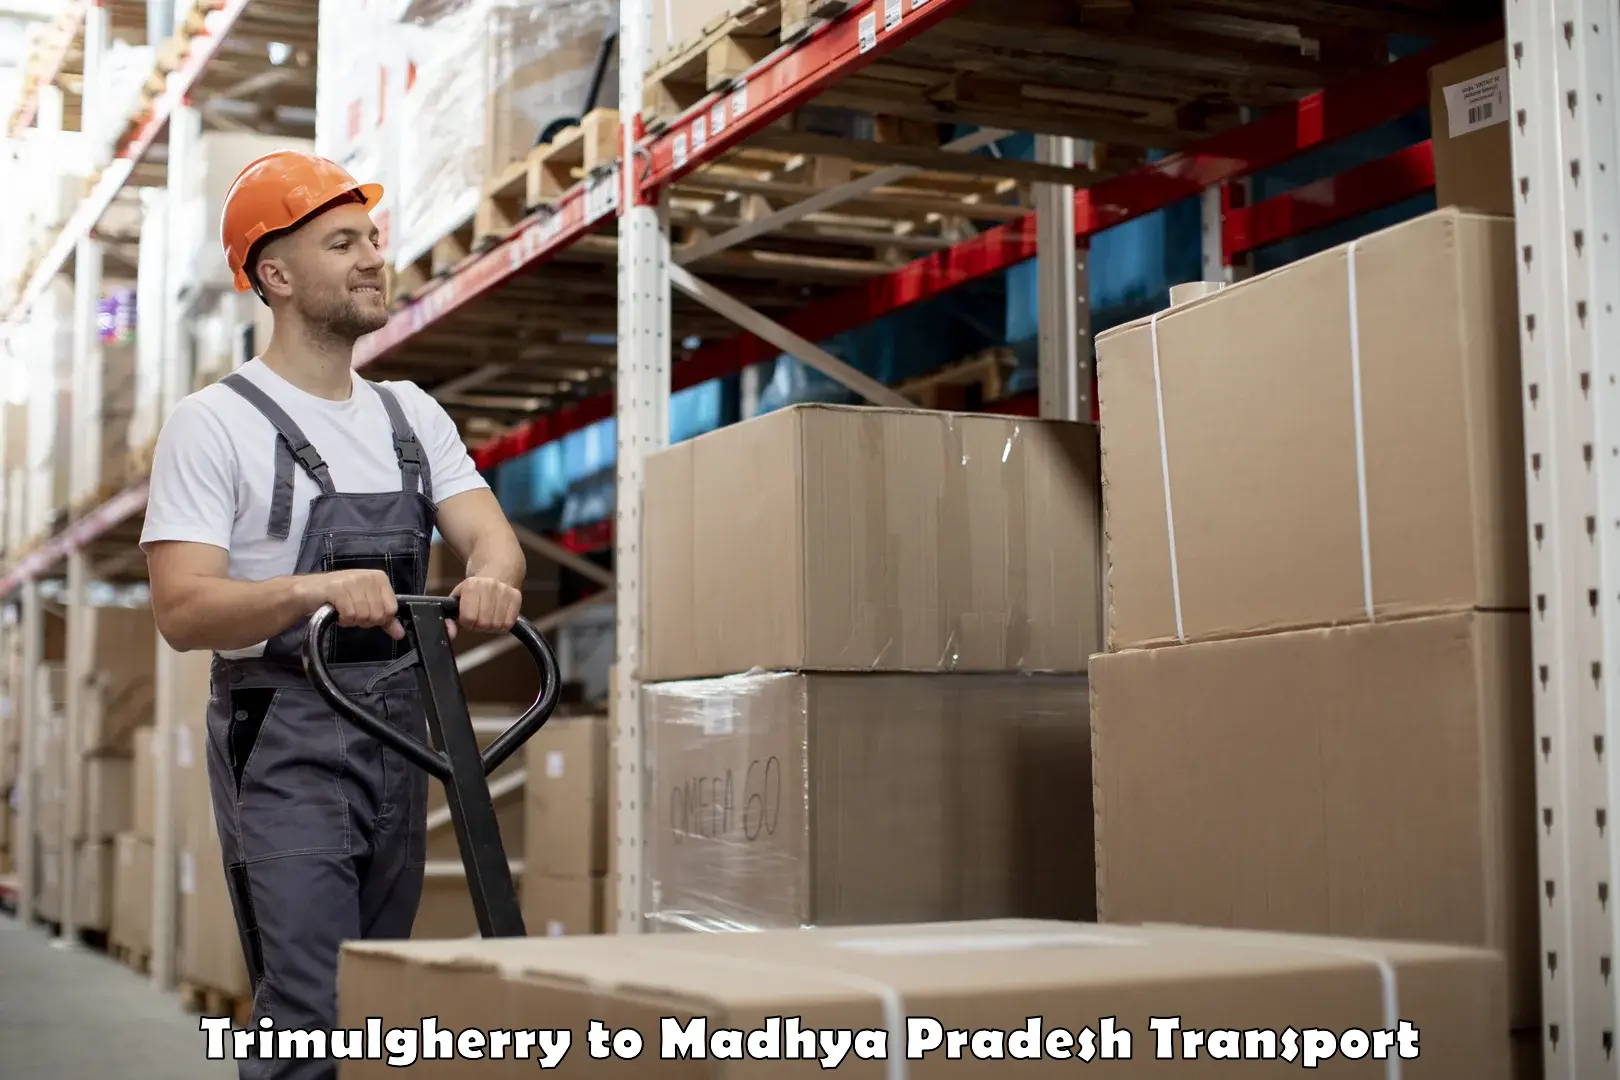 Delivery service Trimulgherry to Jaisinghnagar